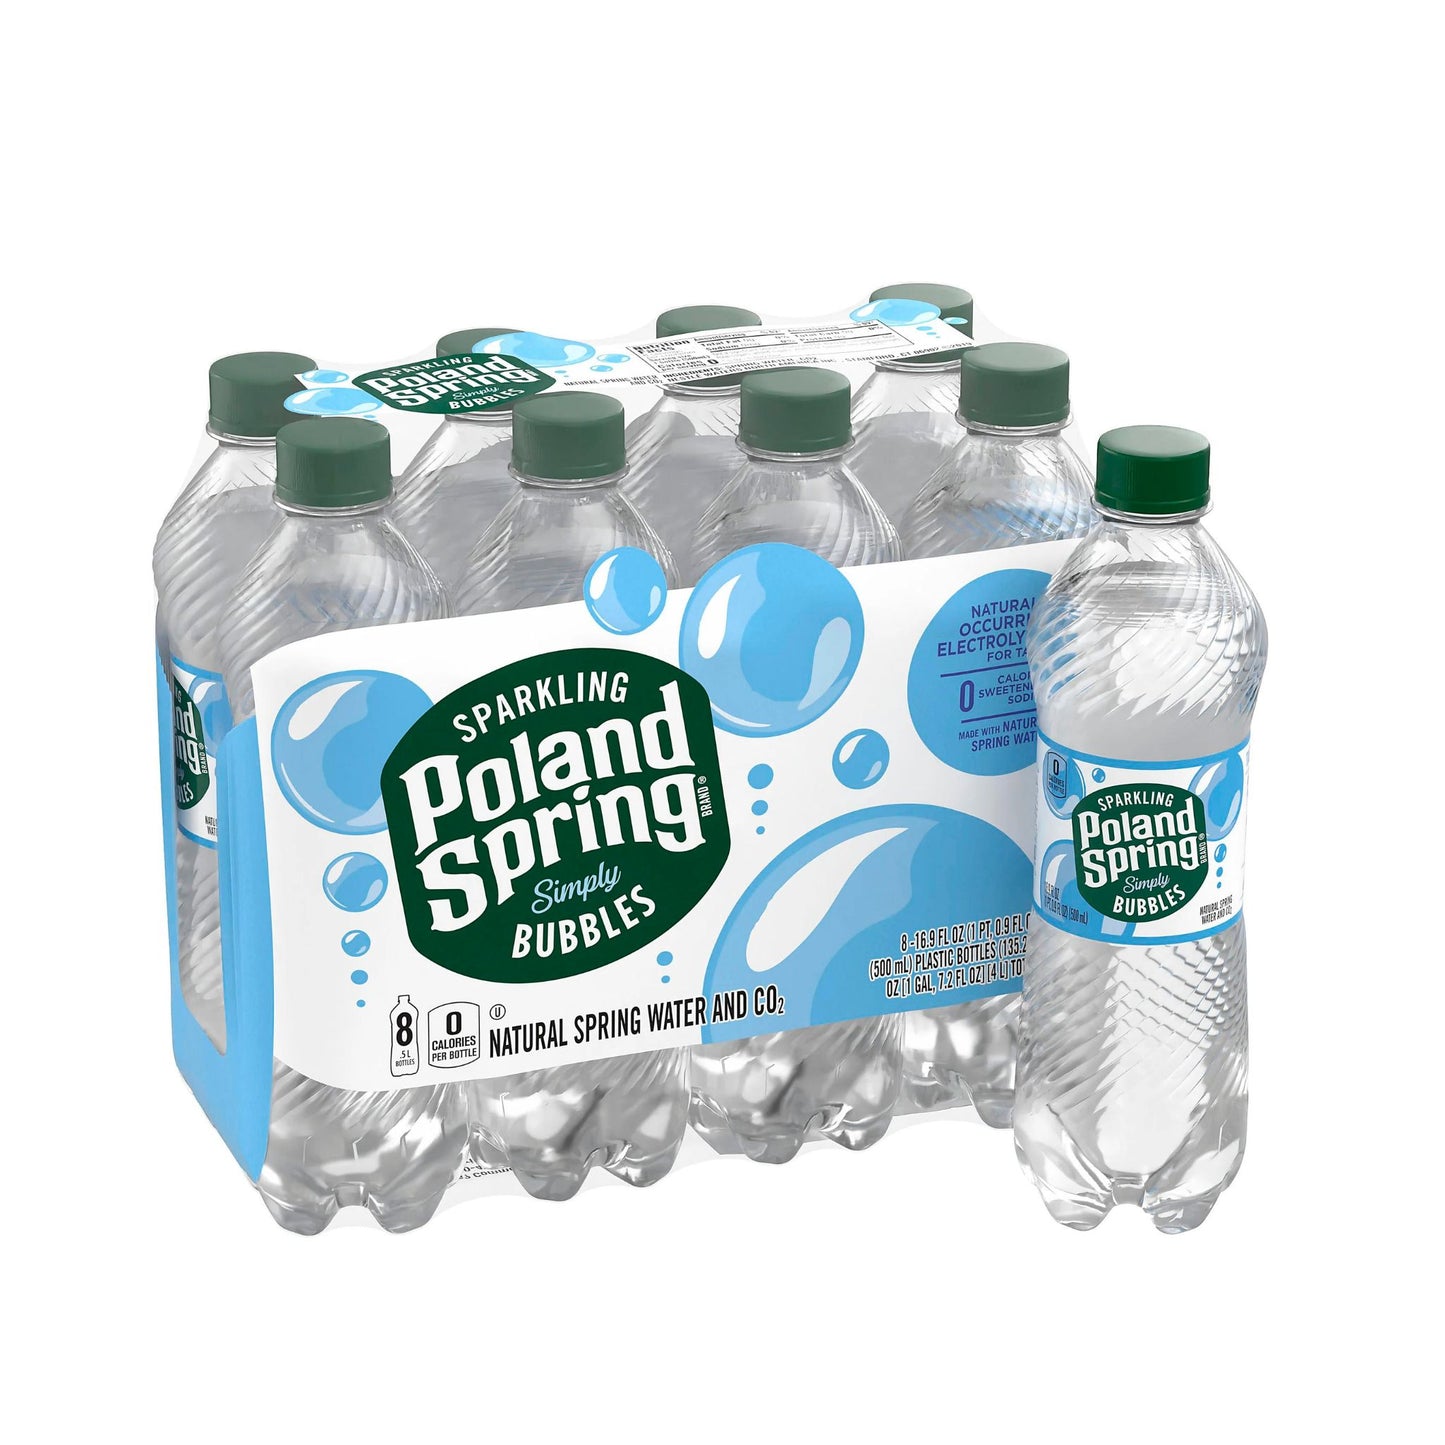 Regional Sparkling Spring Water (Simply Bubbles) 16.9 Oz. Pack Of 8 Bottles